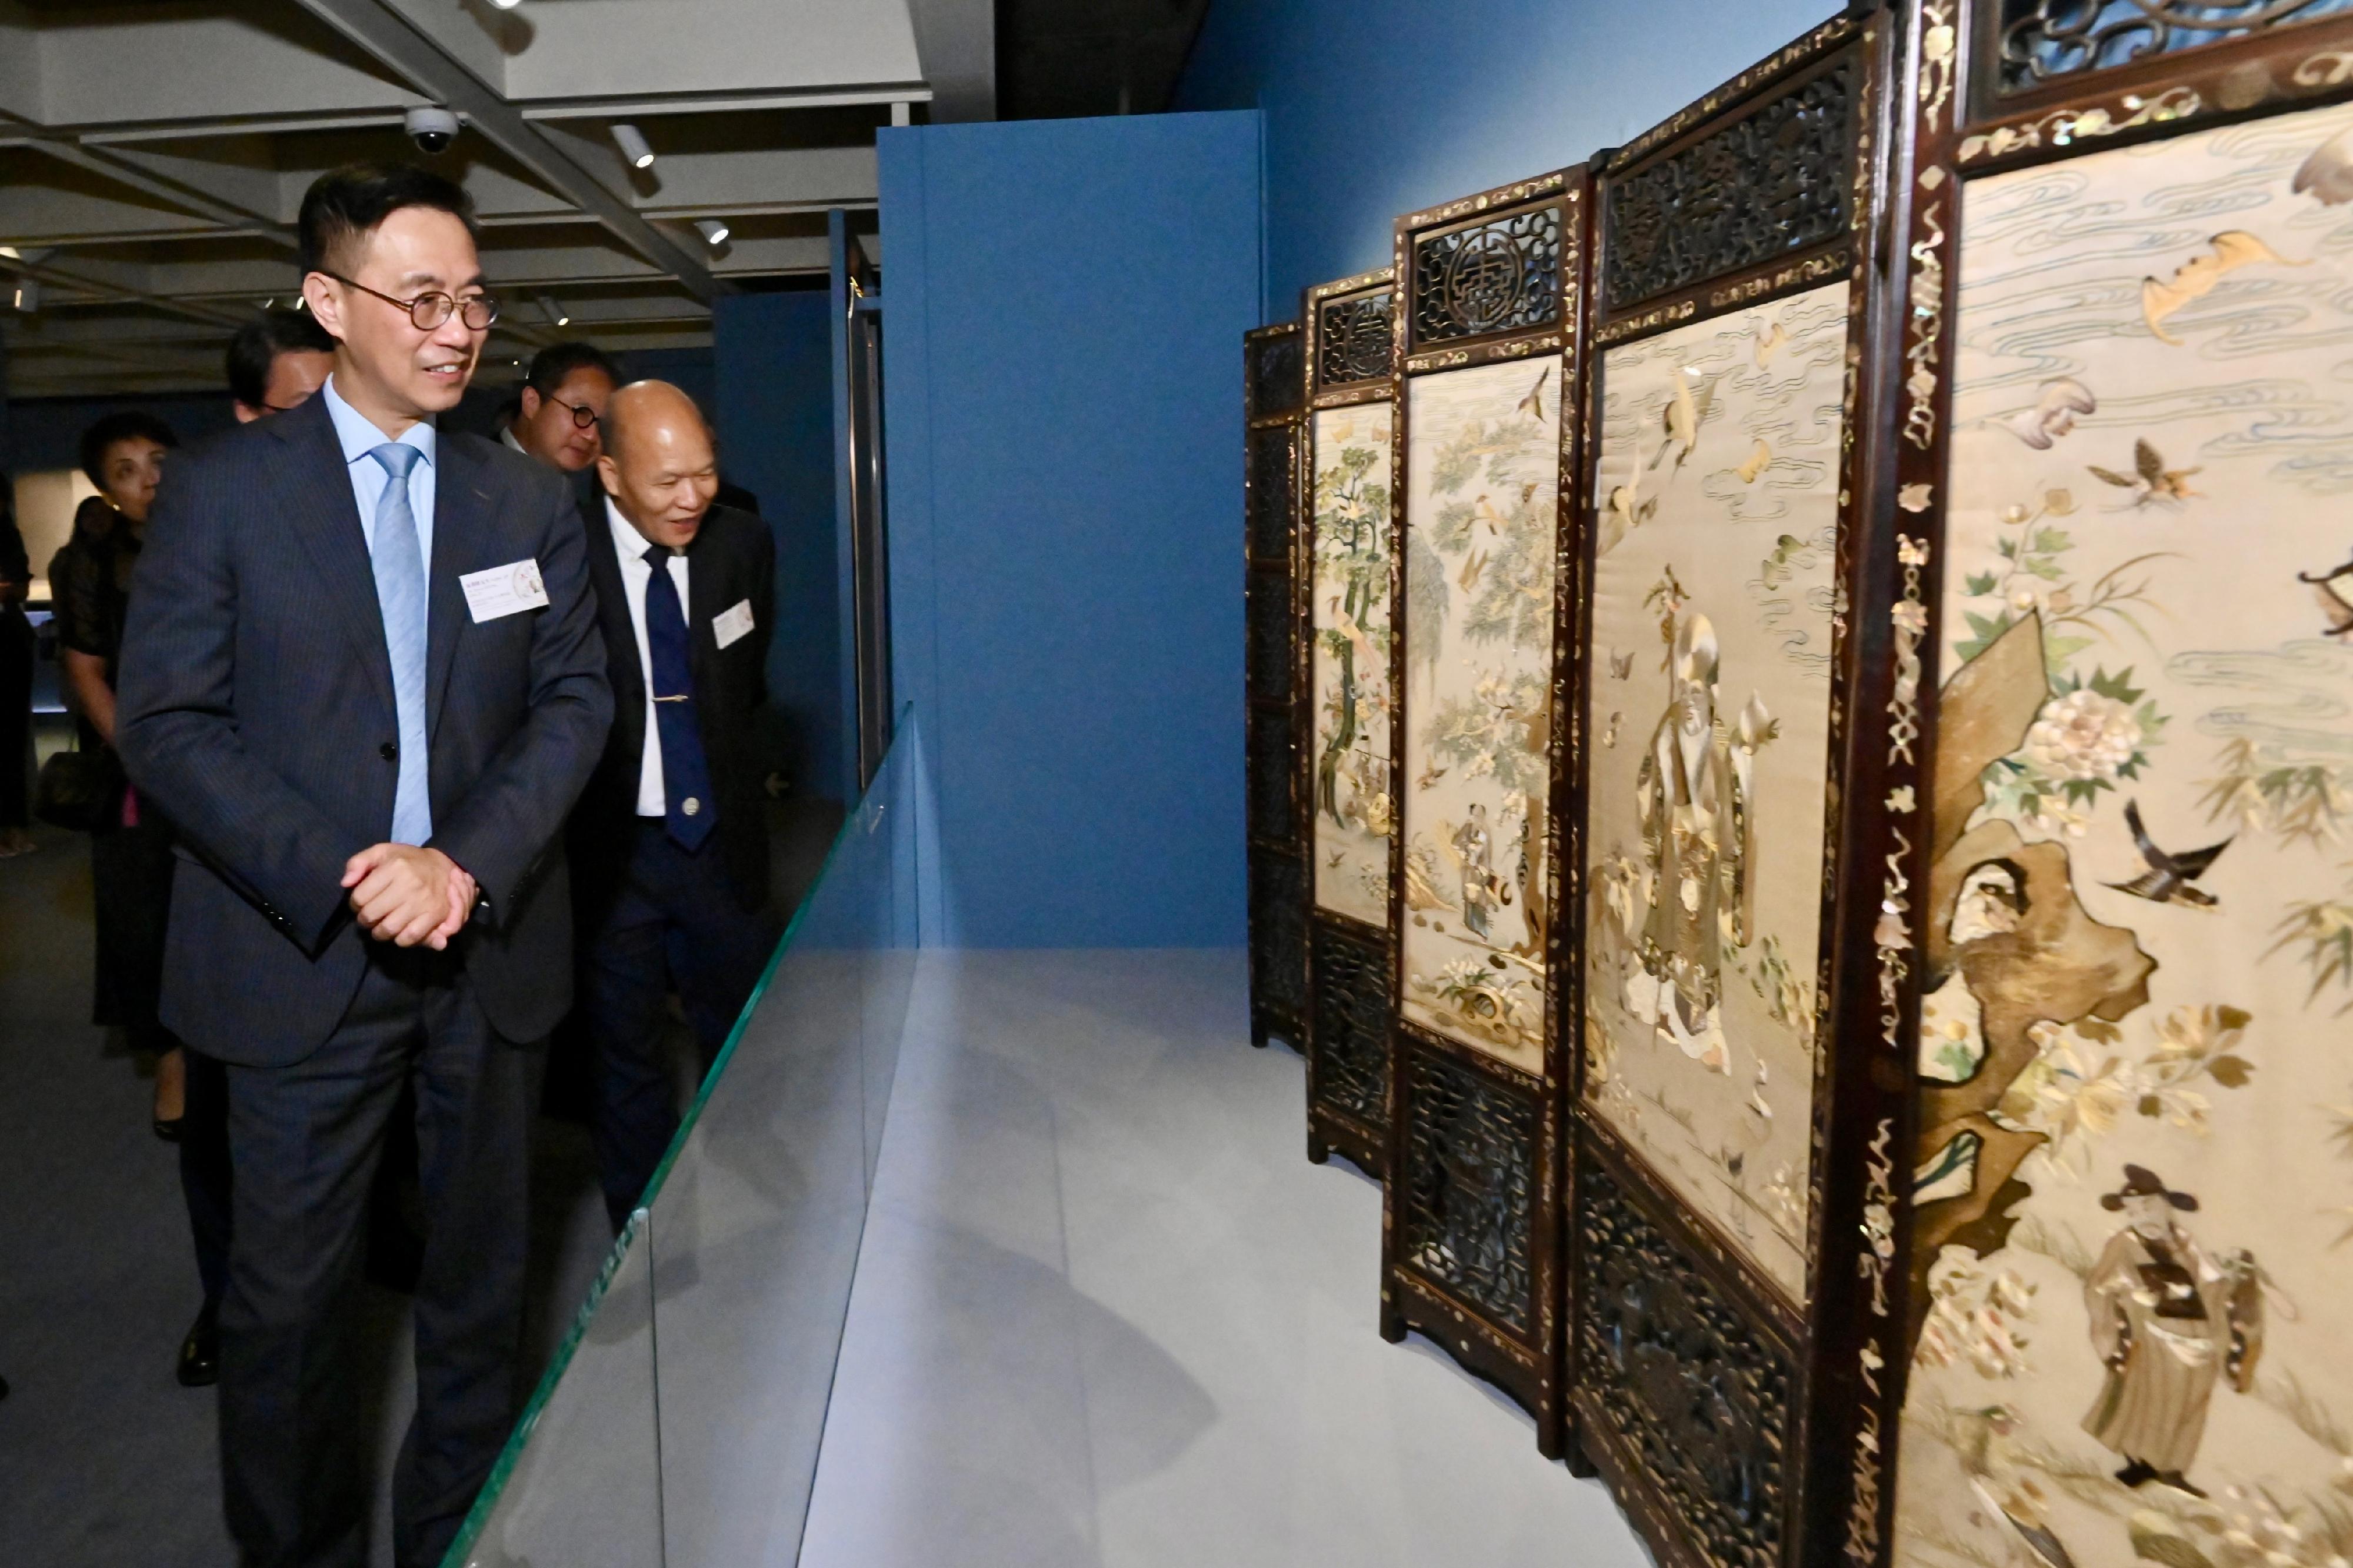 The opening ceremony of the Hong Kong stop of the touring exhibition "A Tale of Three Cities: Guangdong-Hong Kong-Macao Greater Bay Area and Export of Silk Products in the Ming and Qing Dynasties" was held today (September 7) at the Hong Kong Museum of Art. Picture shows officiating guests, the Secretary for Culture, Sports and Tourism, Mr Kevin Yeung (left), and the Deputy Director General of the Department of Culture and Tourism of Guangdong Province and Director of the Cultural Heritage Bureau of Guangdong Province, Mr Long Jiayou (right), appreciating the ingenious set of Canton embroidered folding screen with the scene of birthday greetings from the Eight Immortals.